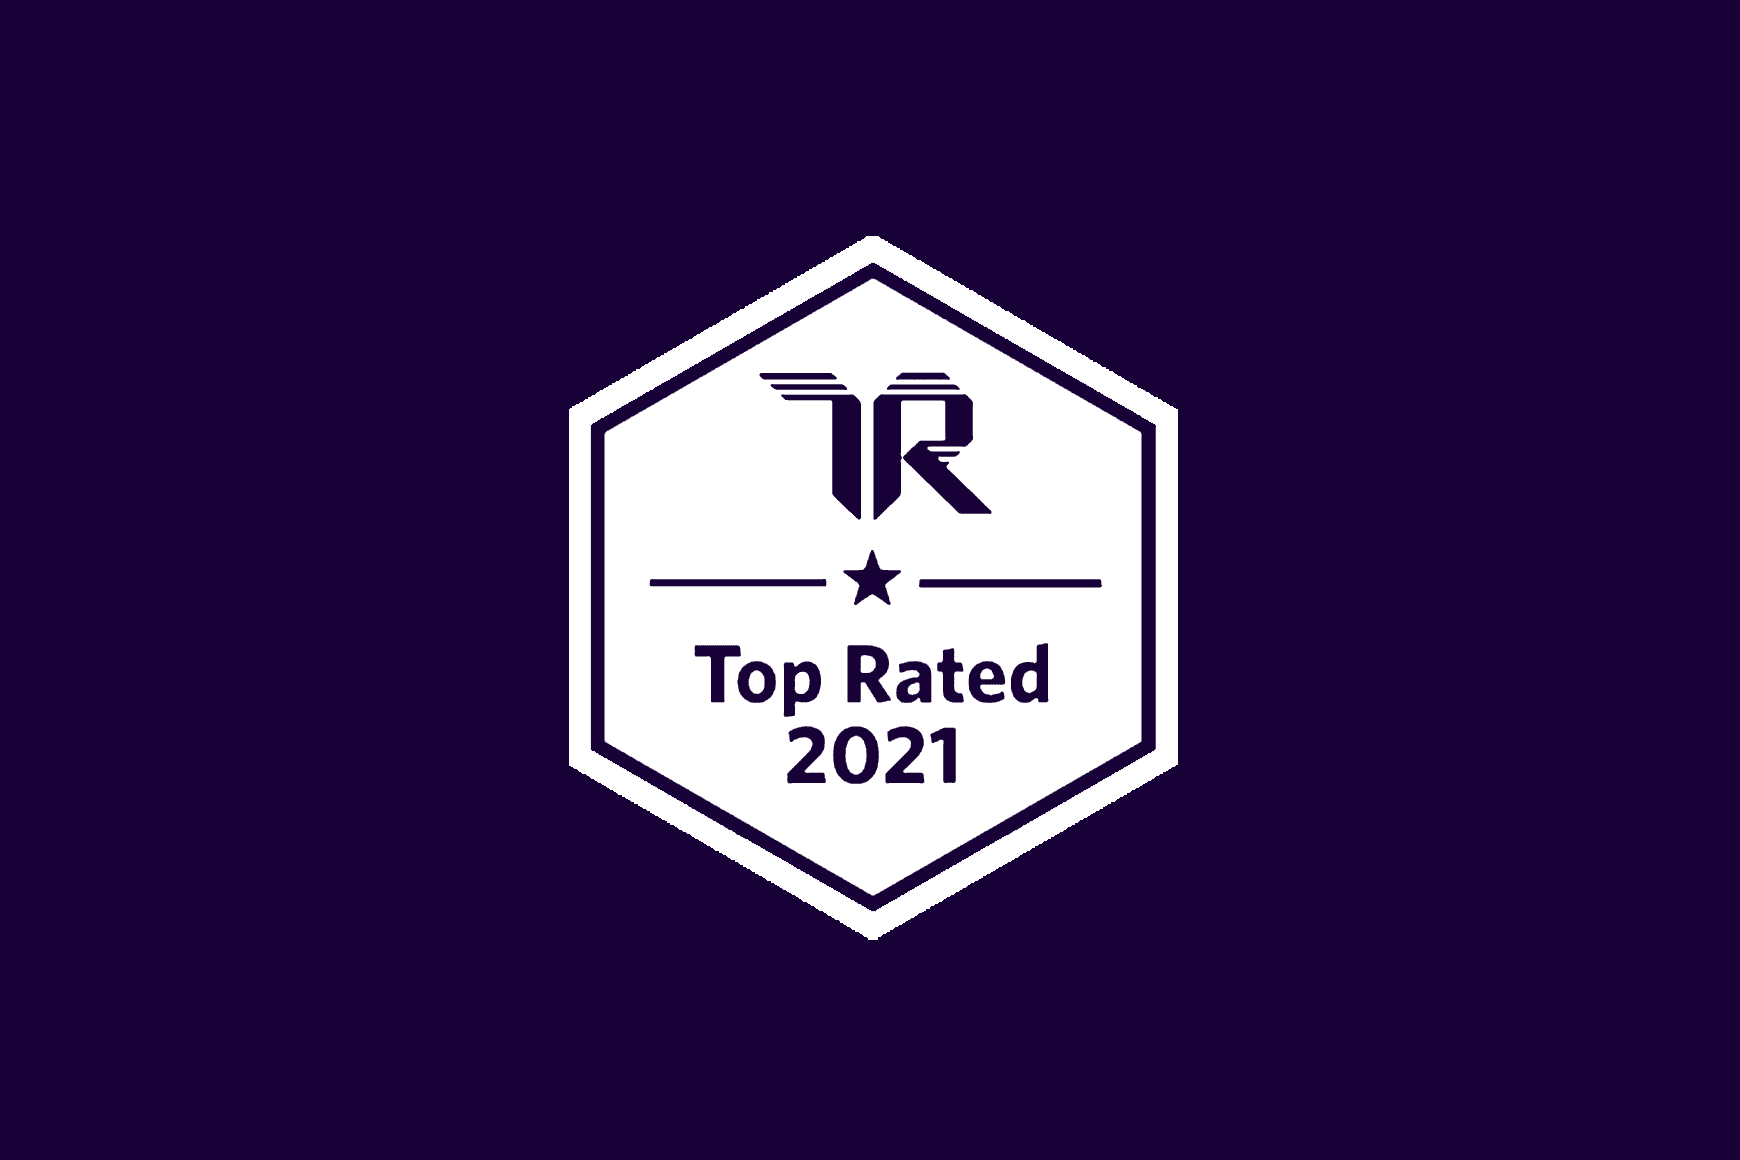 Talkdesk wins two 2021 Top Rated awards from TrustRadius